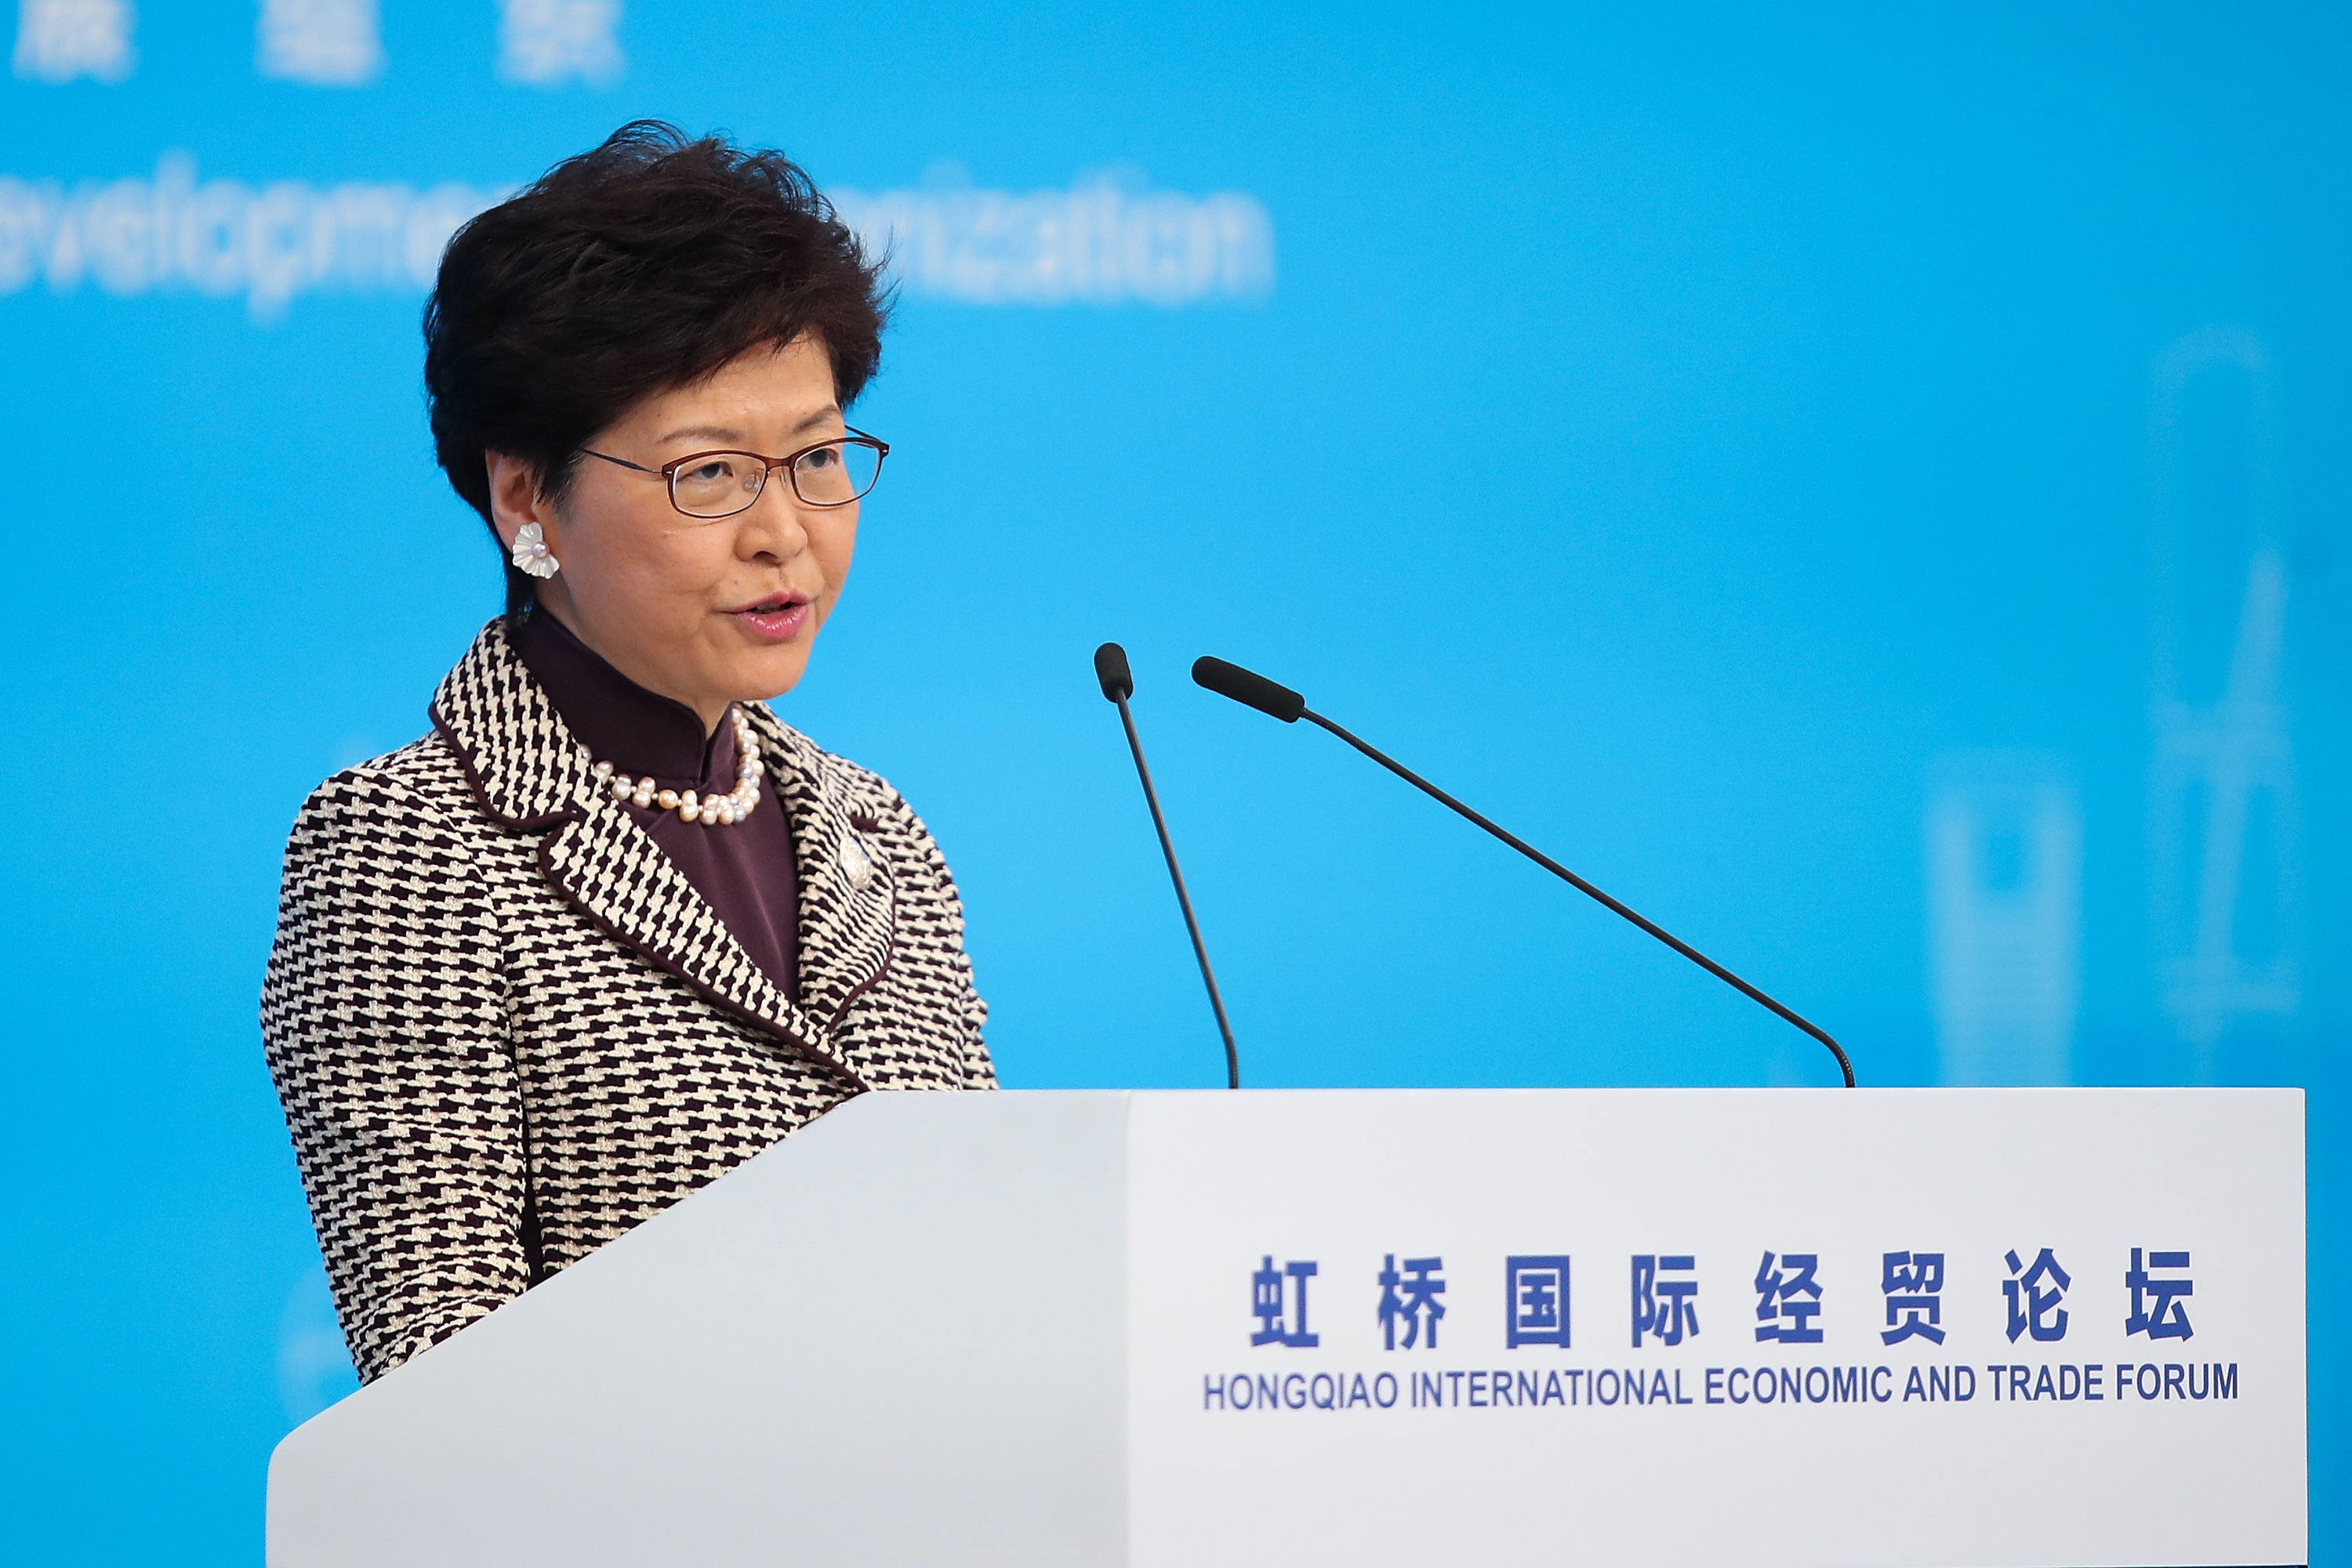 Hong Kong Chief Executive Carrie Lam speaking duirng the Hongqiao International Economic and Trade Forum in the China International Import Expo at the National Exhibition and Convention Centre on November 5, 2018 in Shanghai, China.